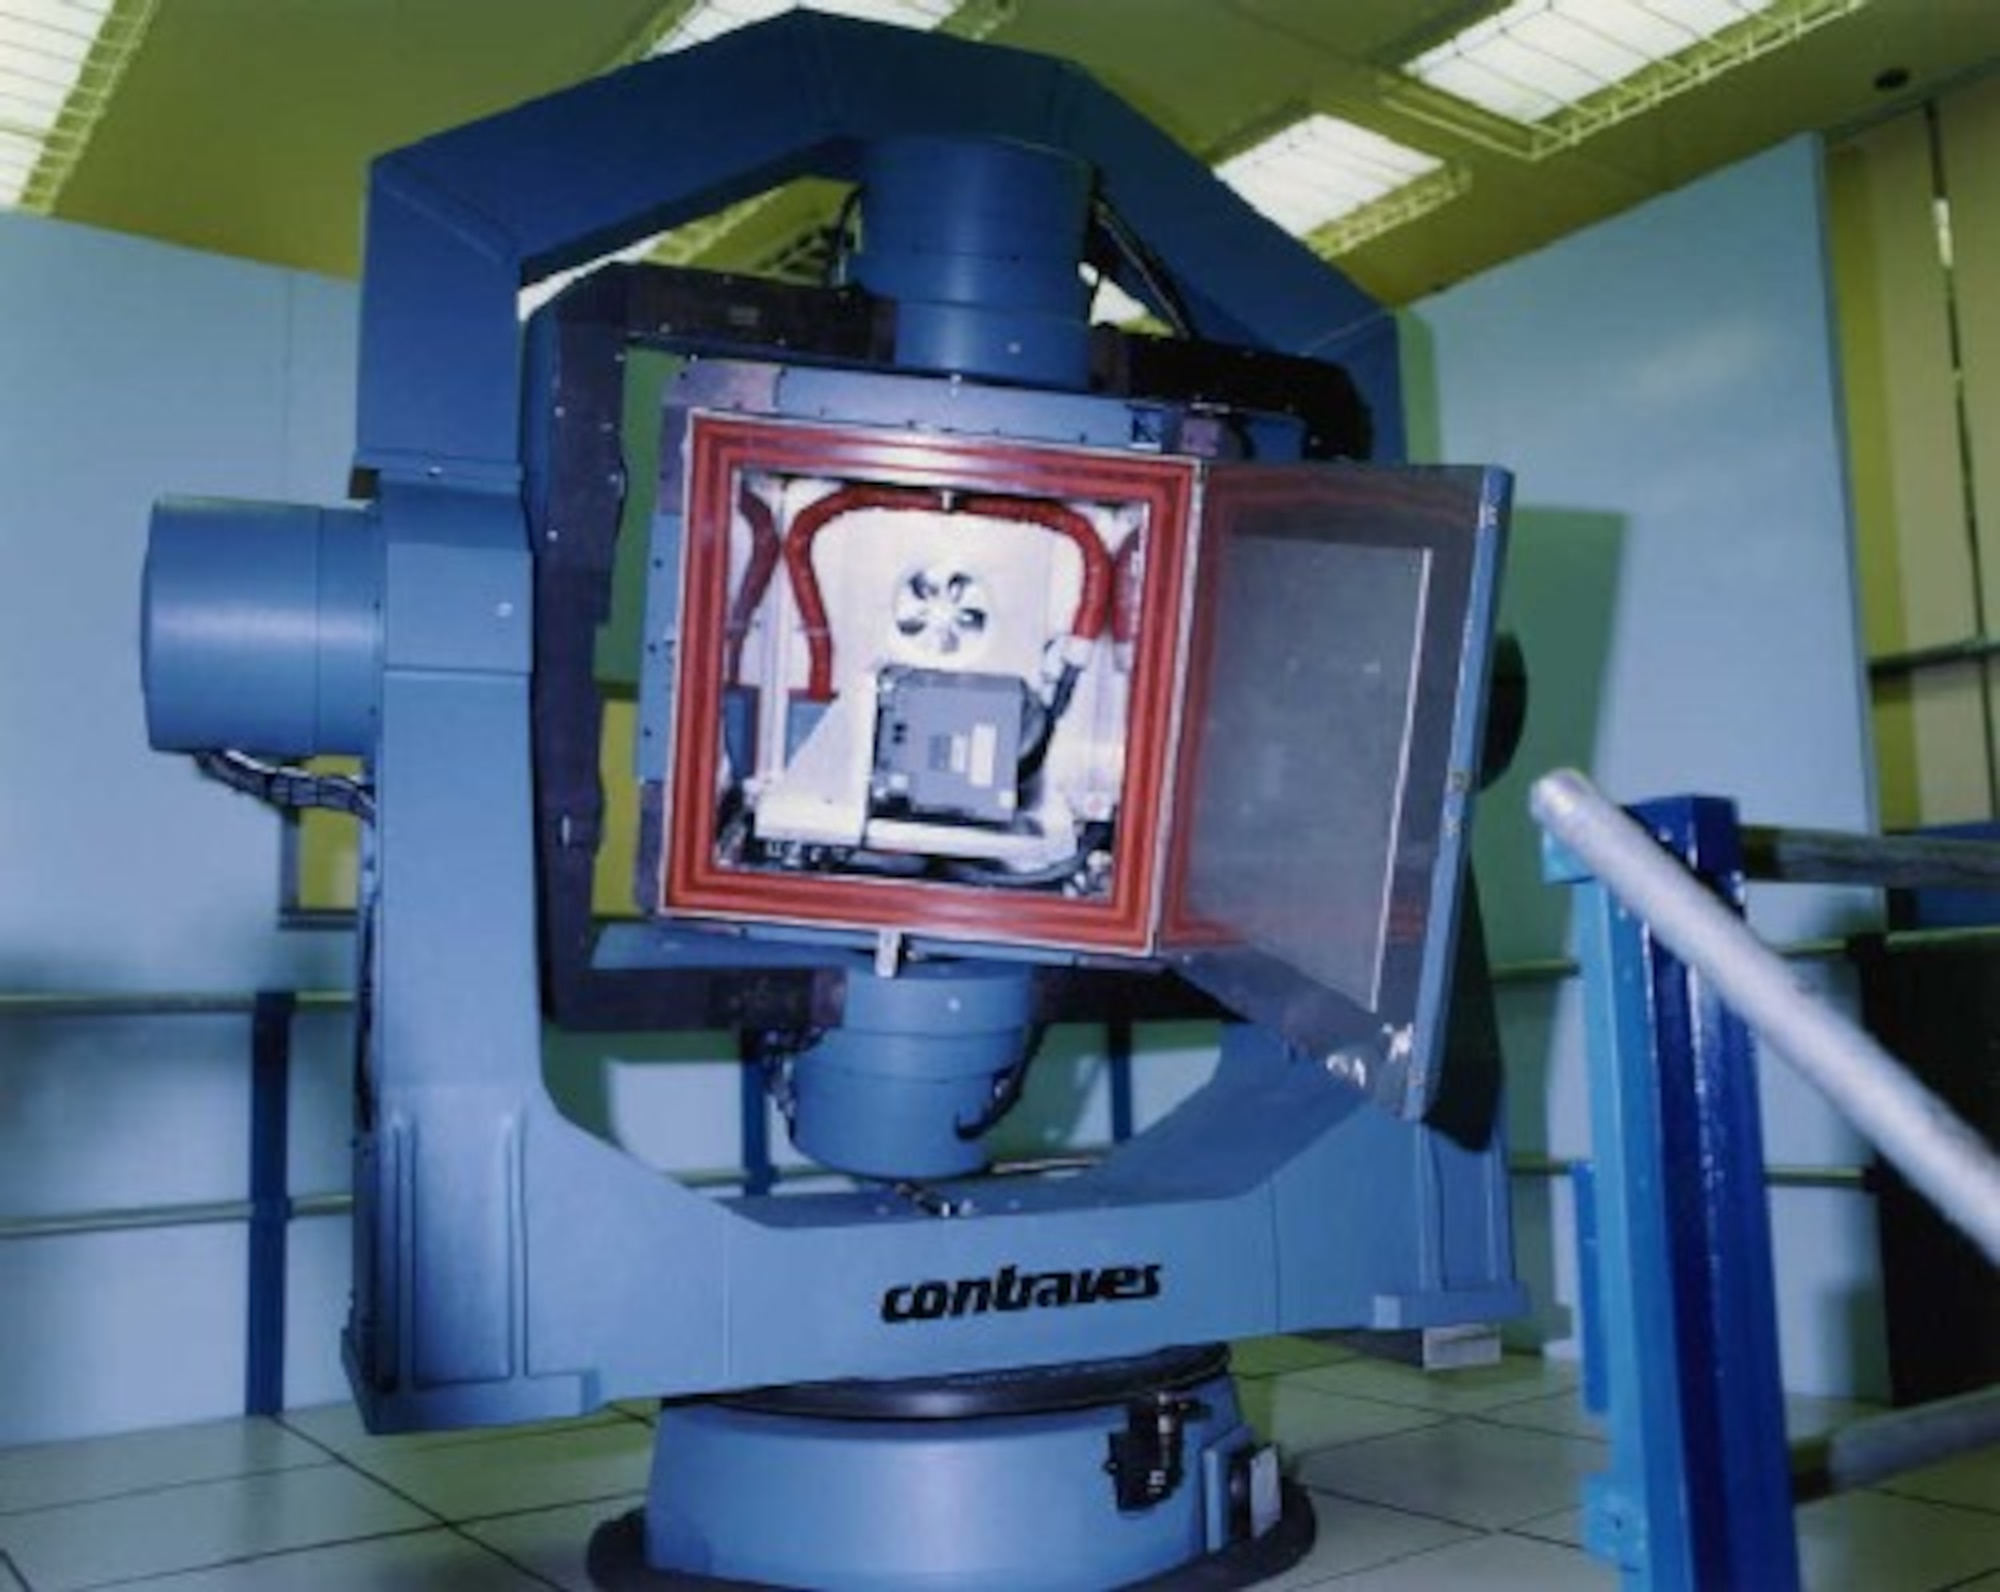 Contraves Model 53Y, 3-axis table, 720 degrees/second rotation, with environmental chamber capable of 100 pound test item.